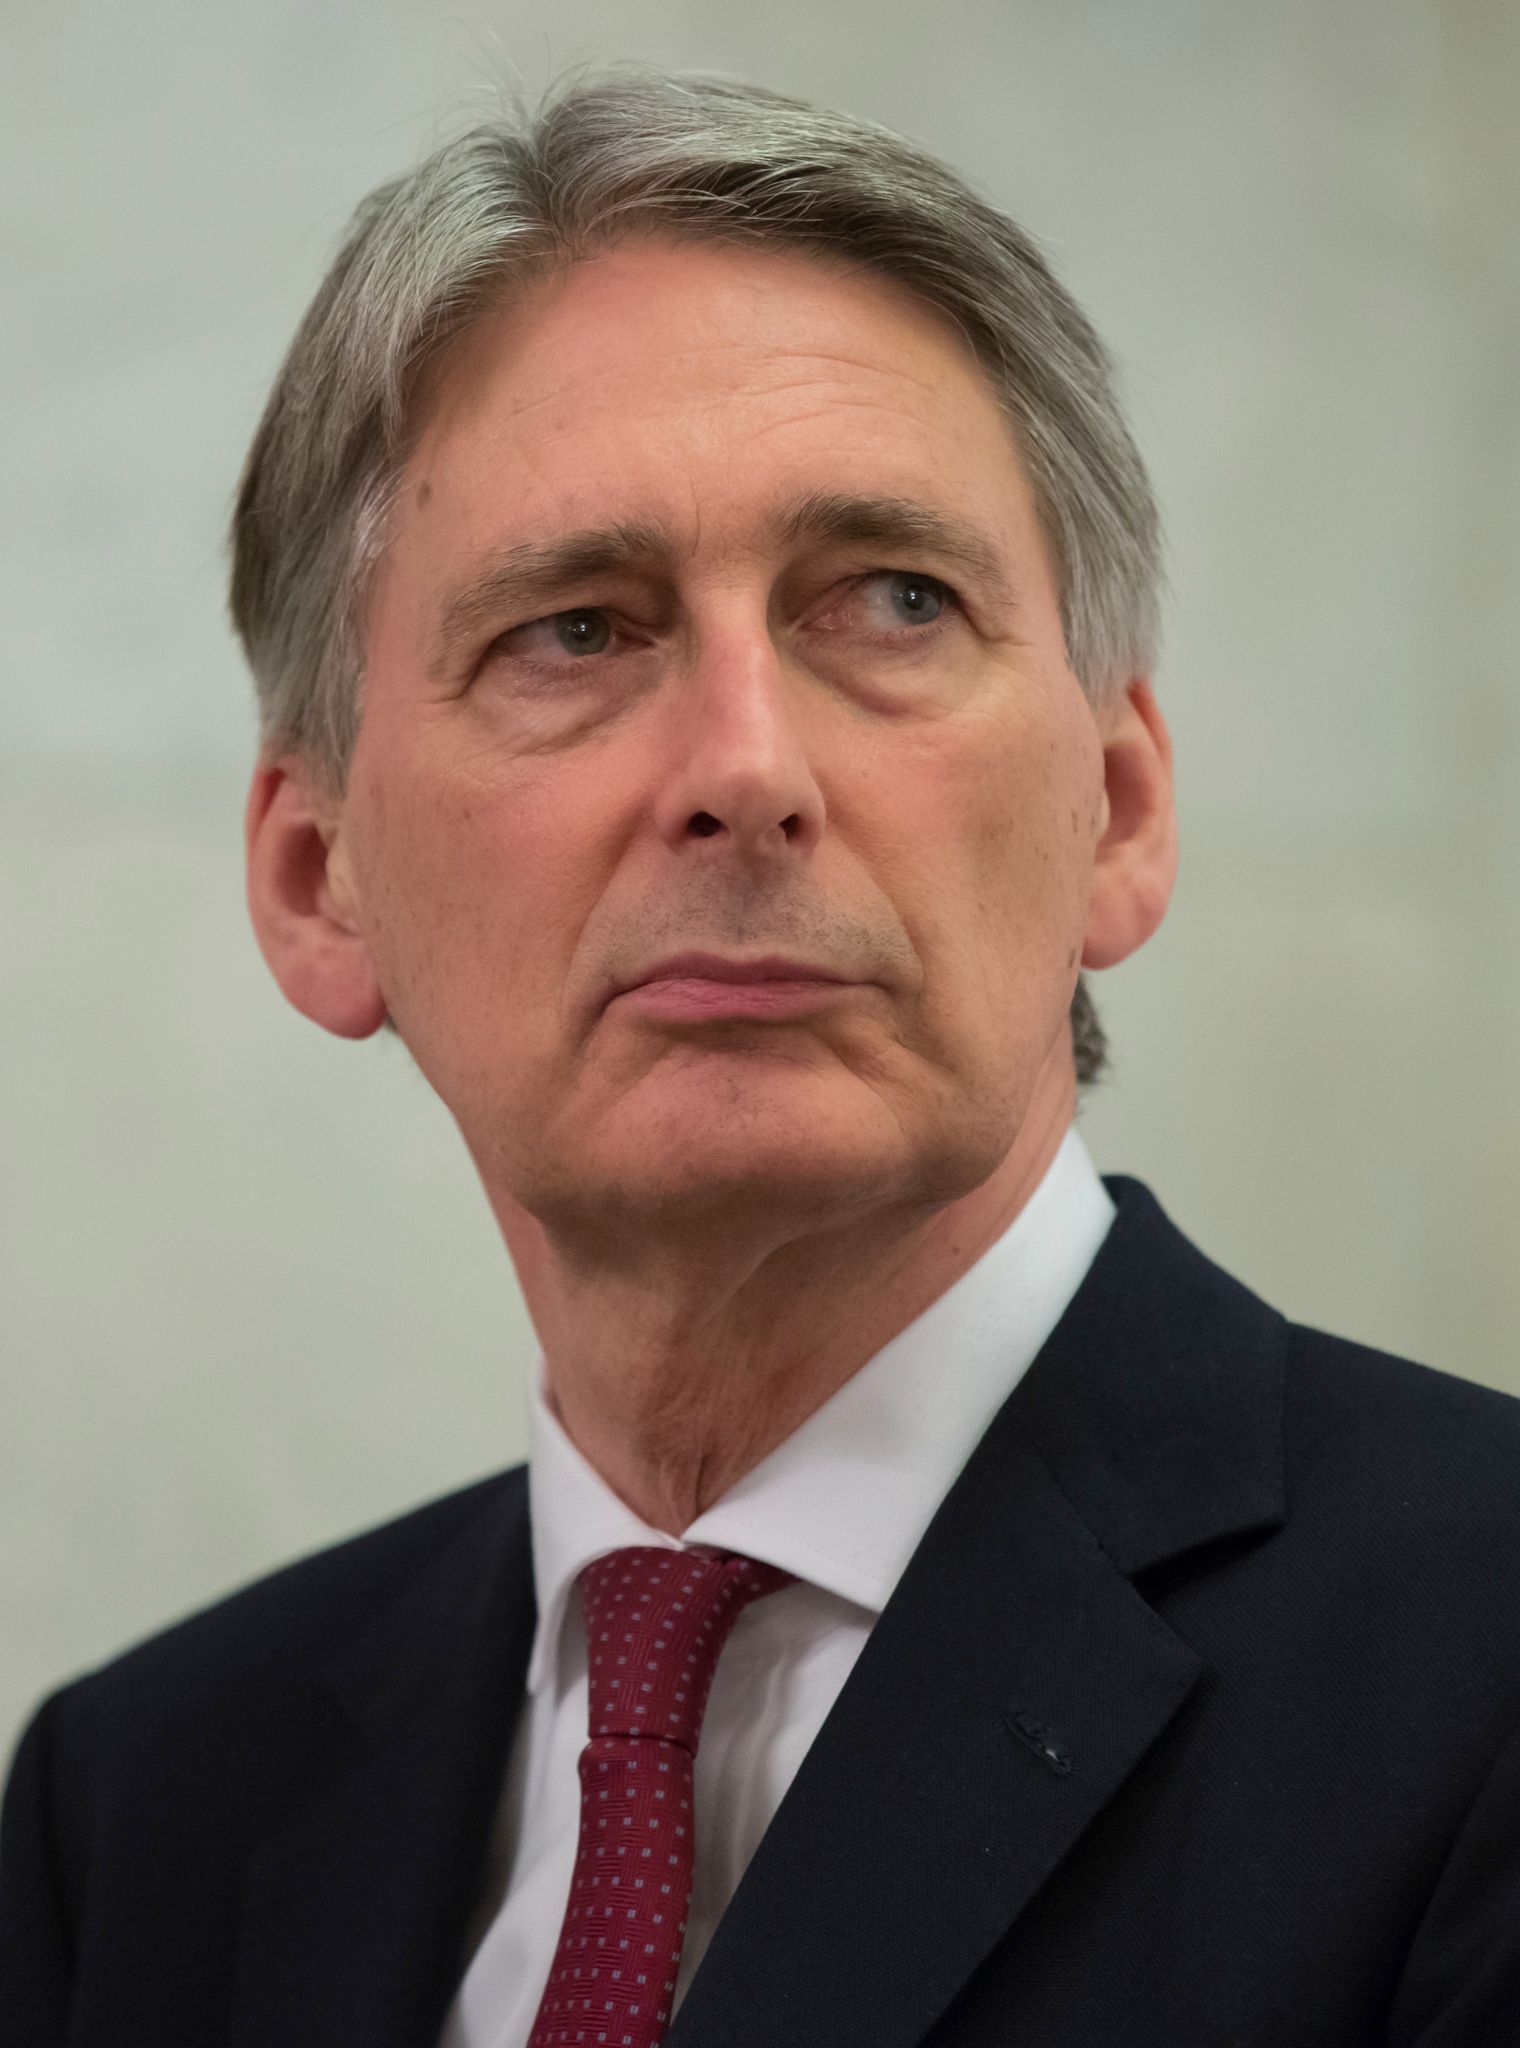 Latest reaction to the Chancellor’s Autumn Statement